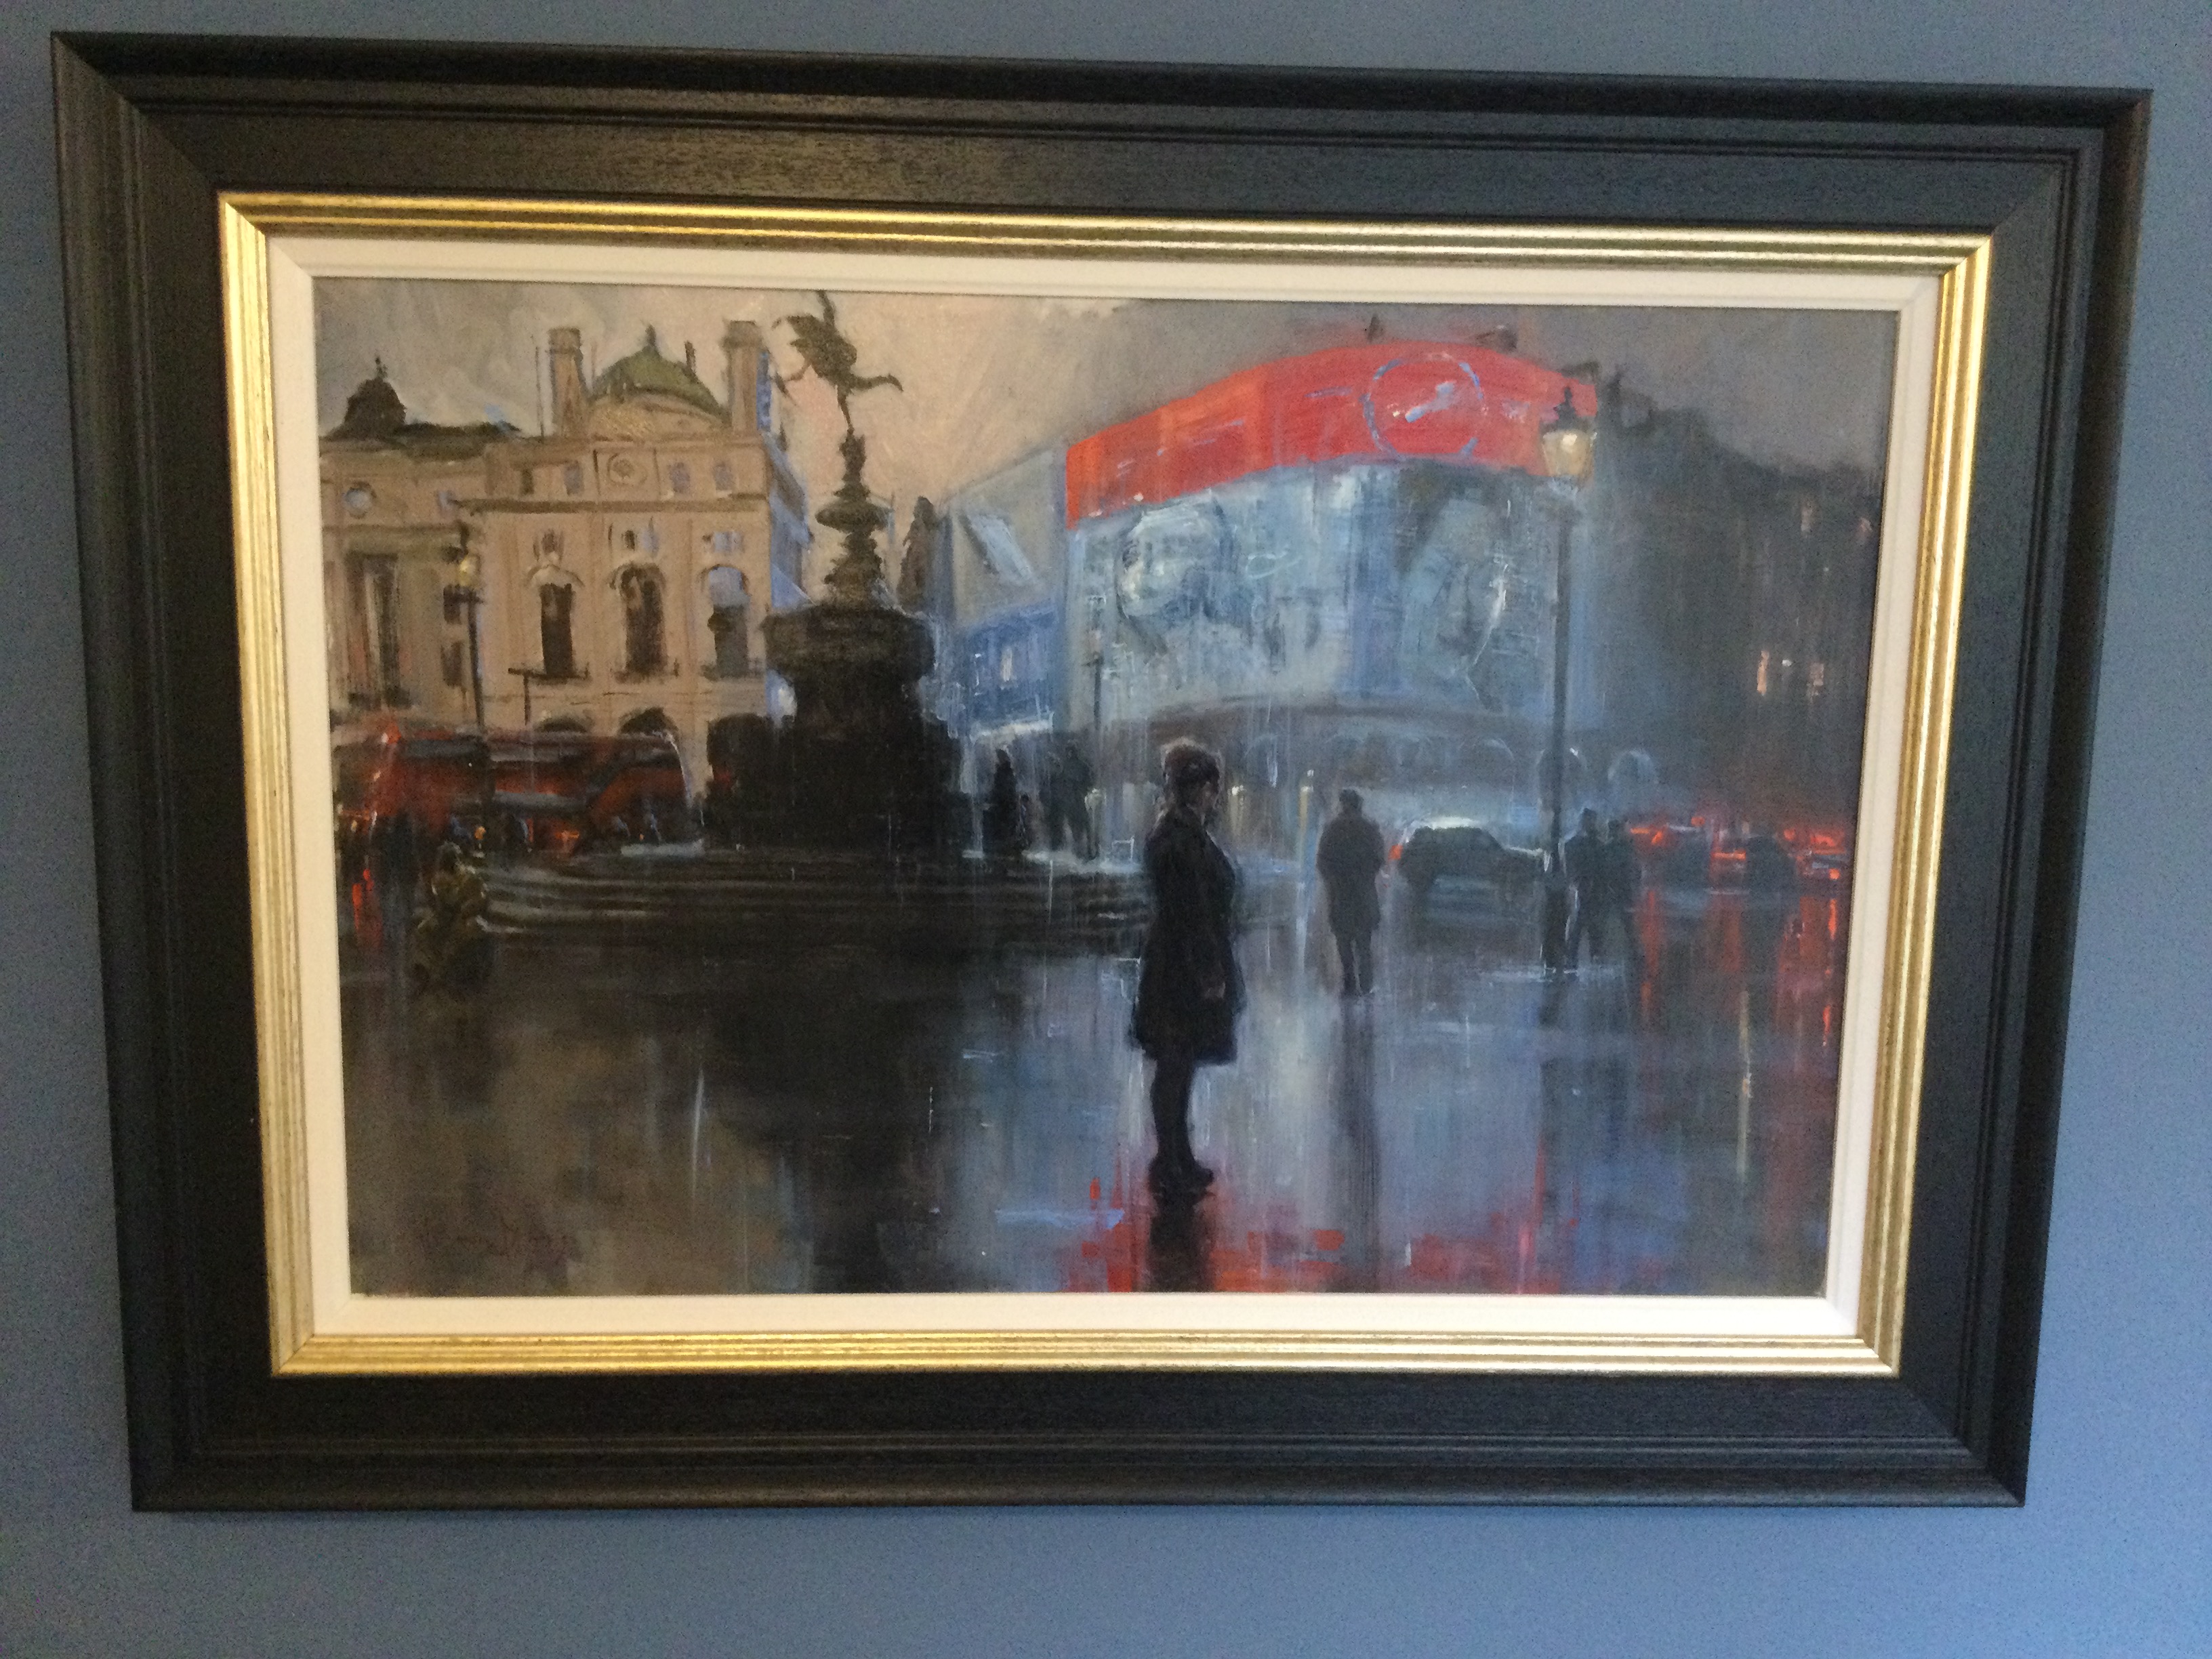 “Piccadilly Rain” by Kevin Day